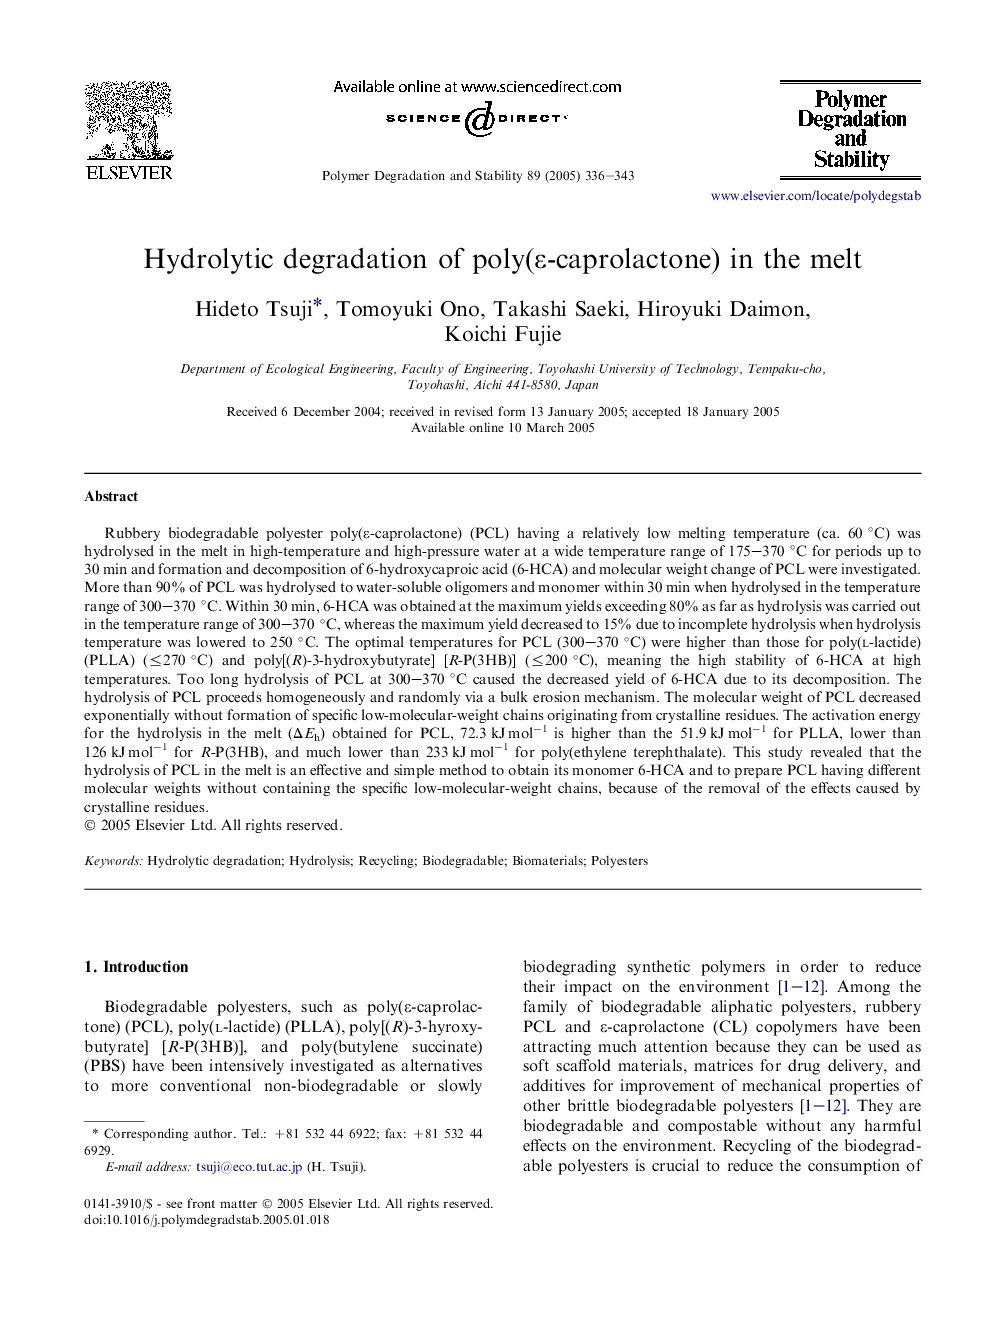 Hydrolytic degradation of poly(Îµ-caprolactone) in the melt